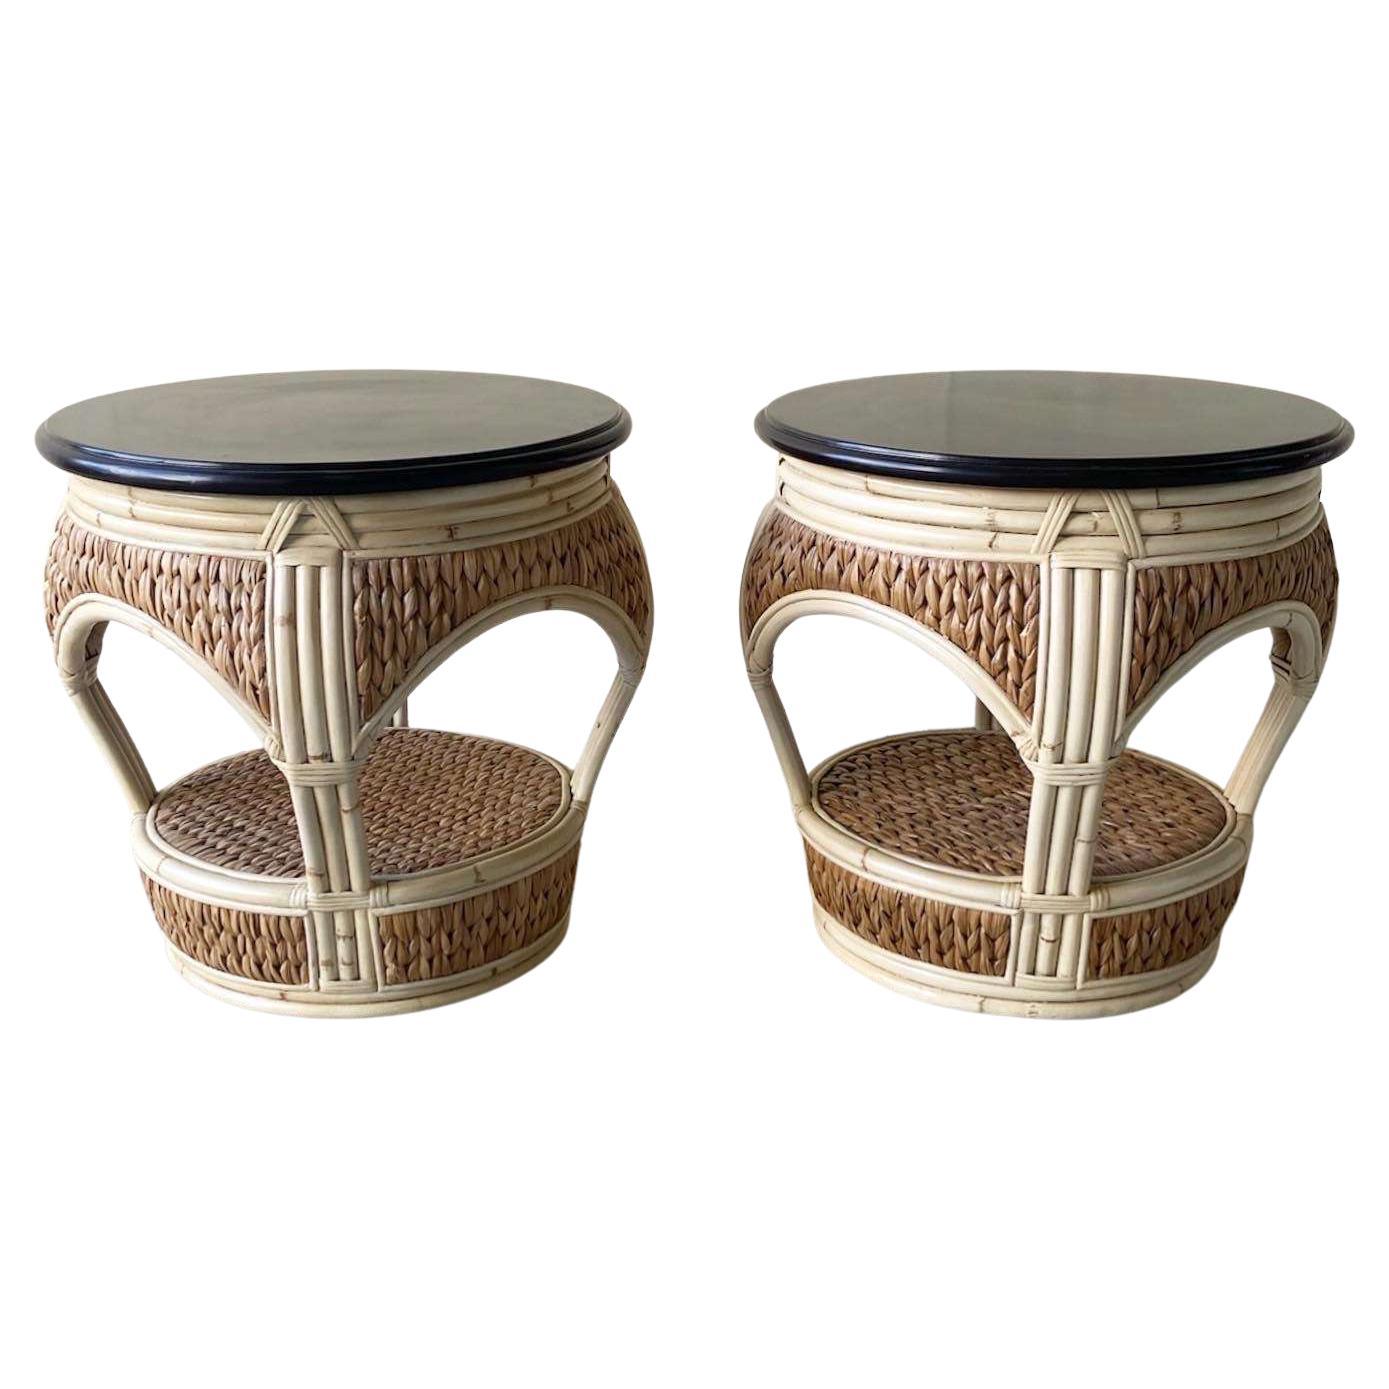 Boho Chic Bamboo and Sea Grass Circular Side Tables - a Pair For Sale